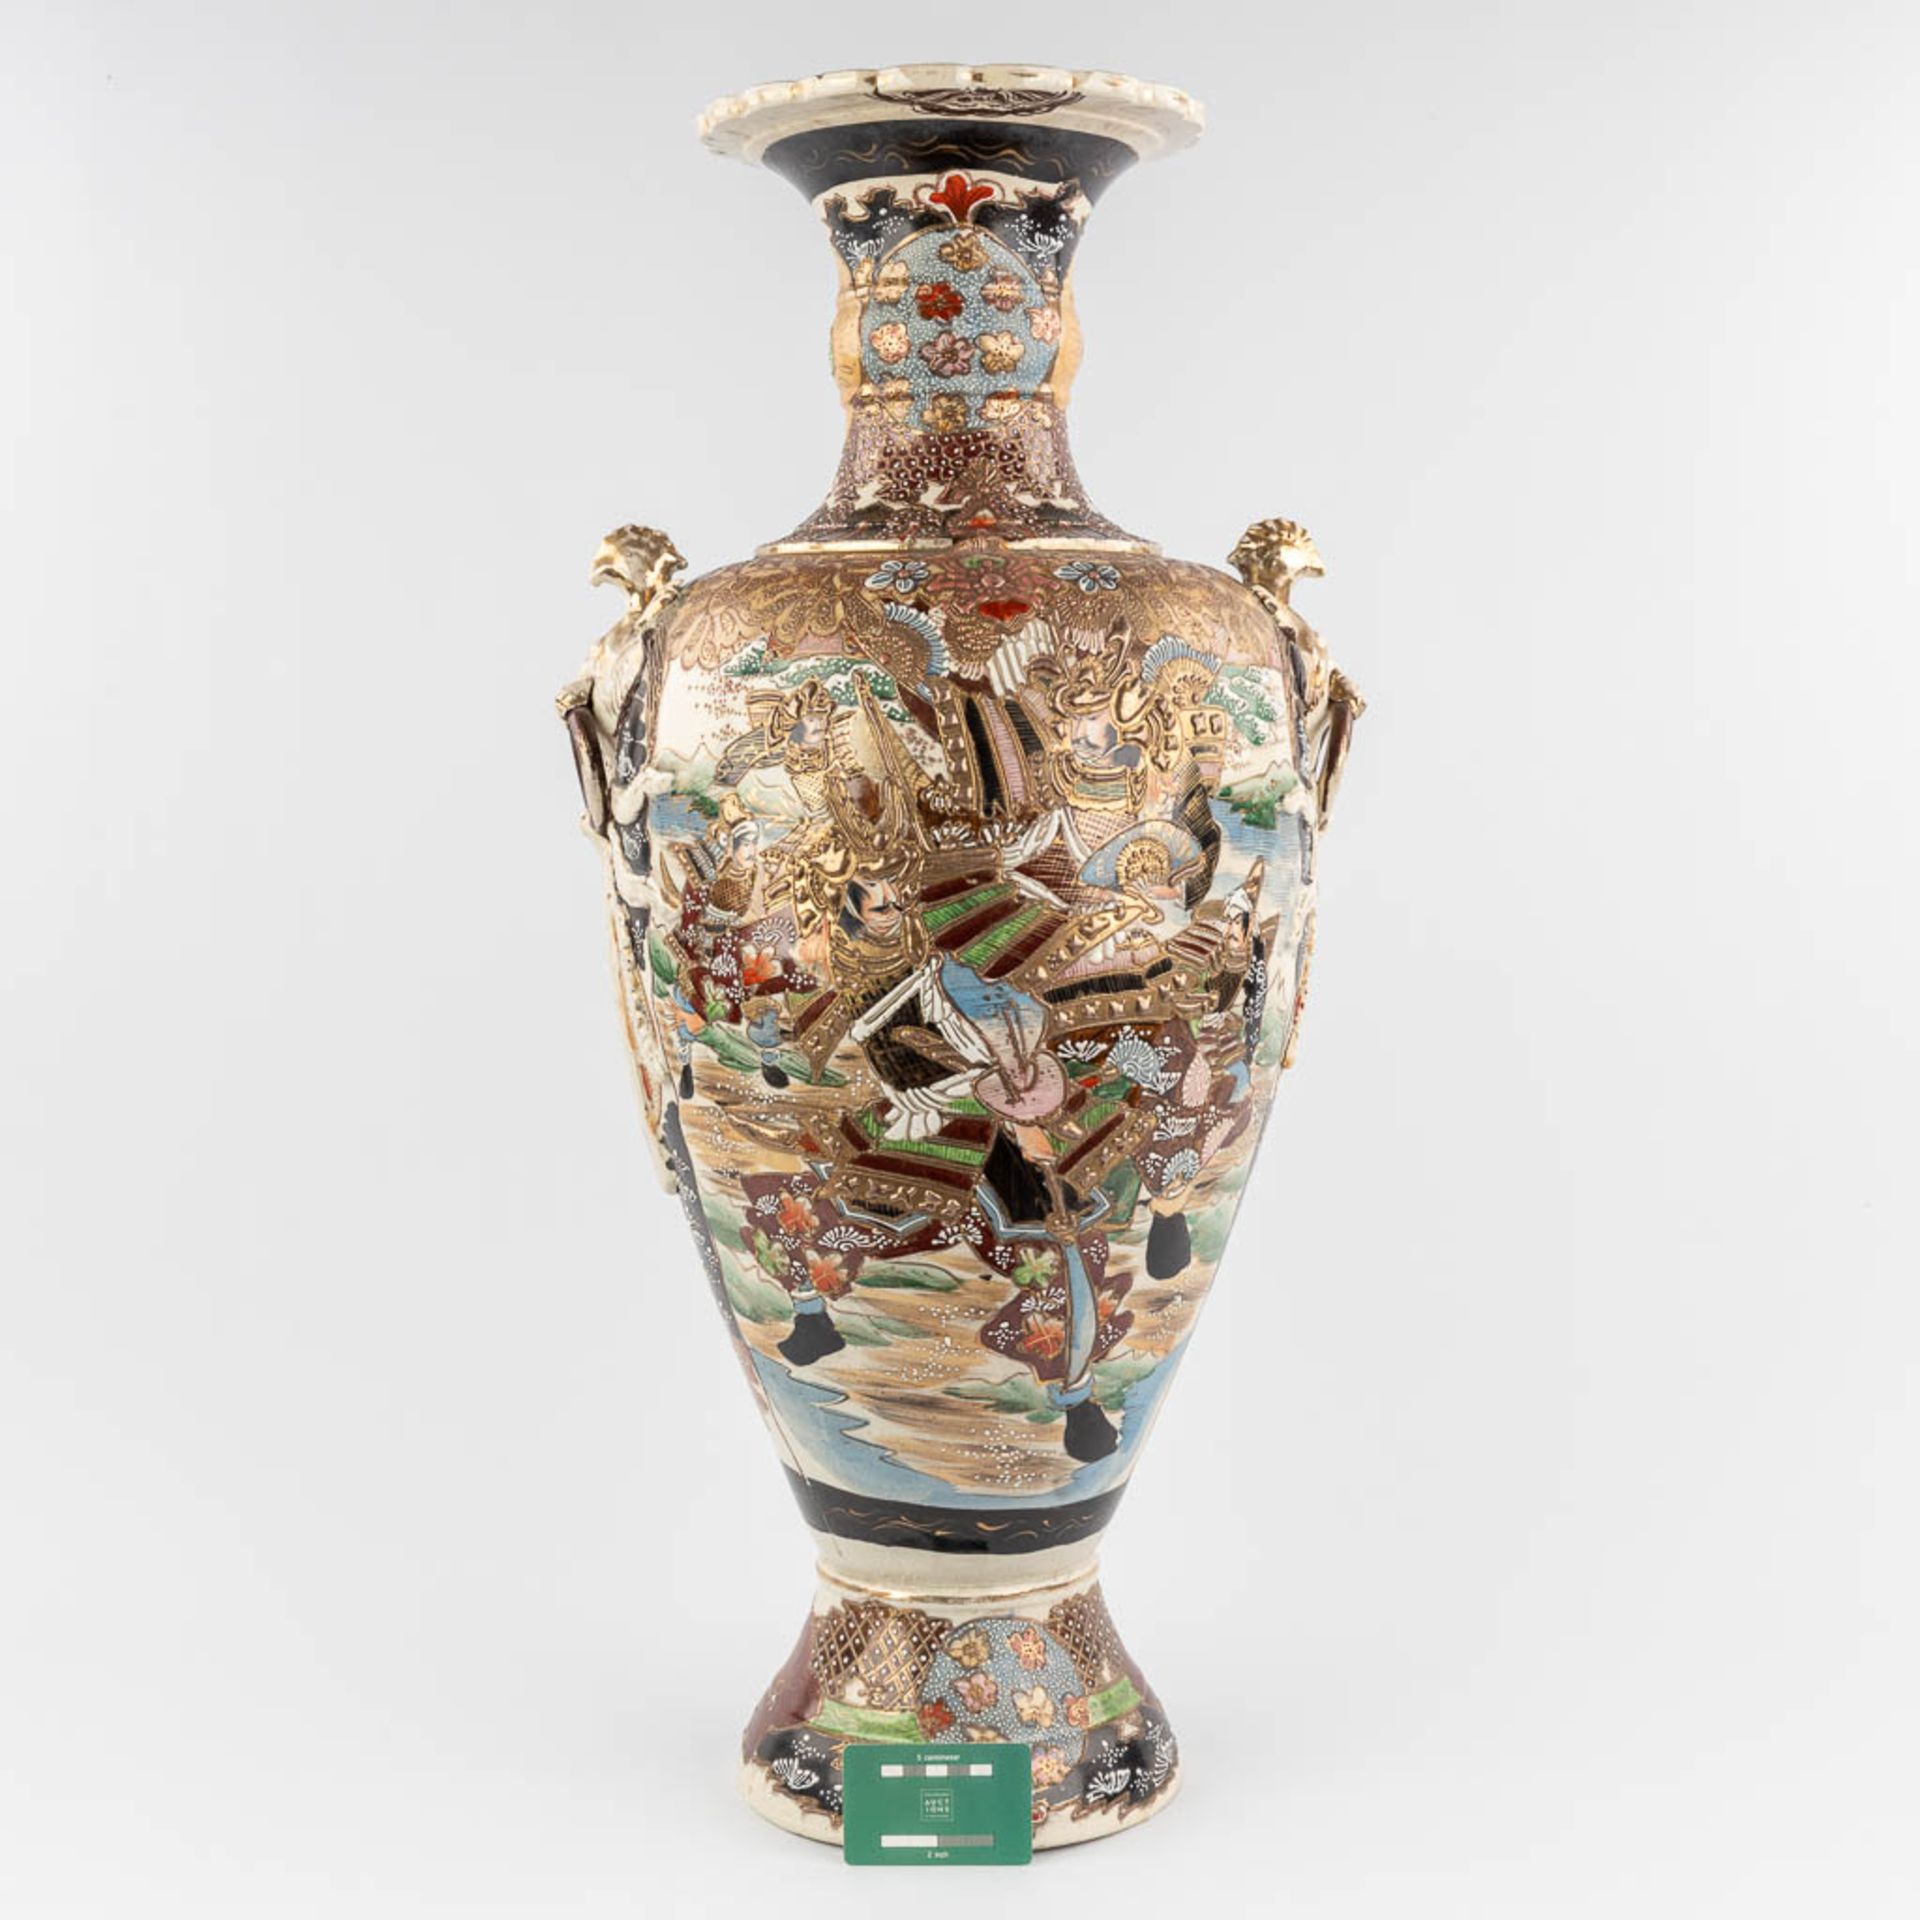 A large and decorative Japanese Satsuma vase. 20th C. (H:80 x D:32 cm) - Image 2 of 16